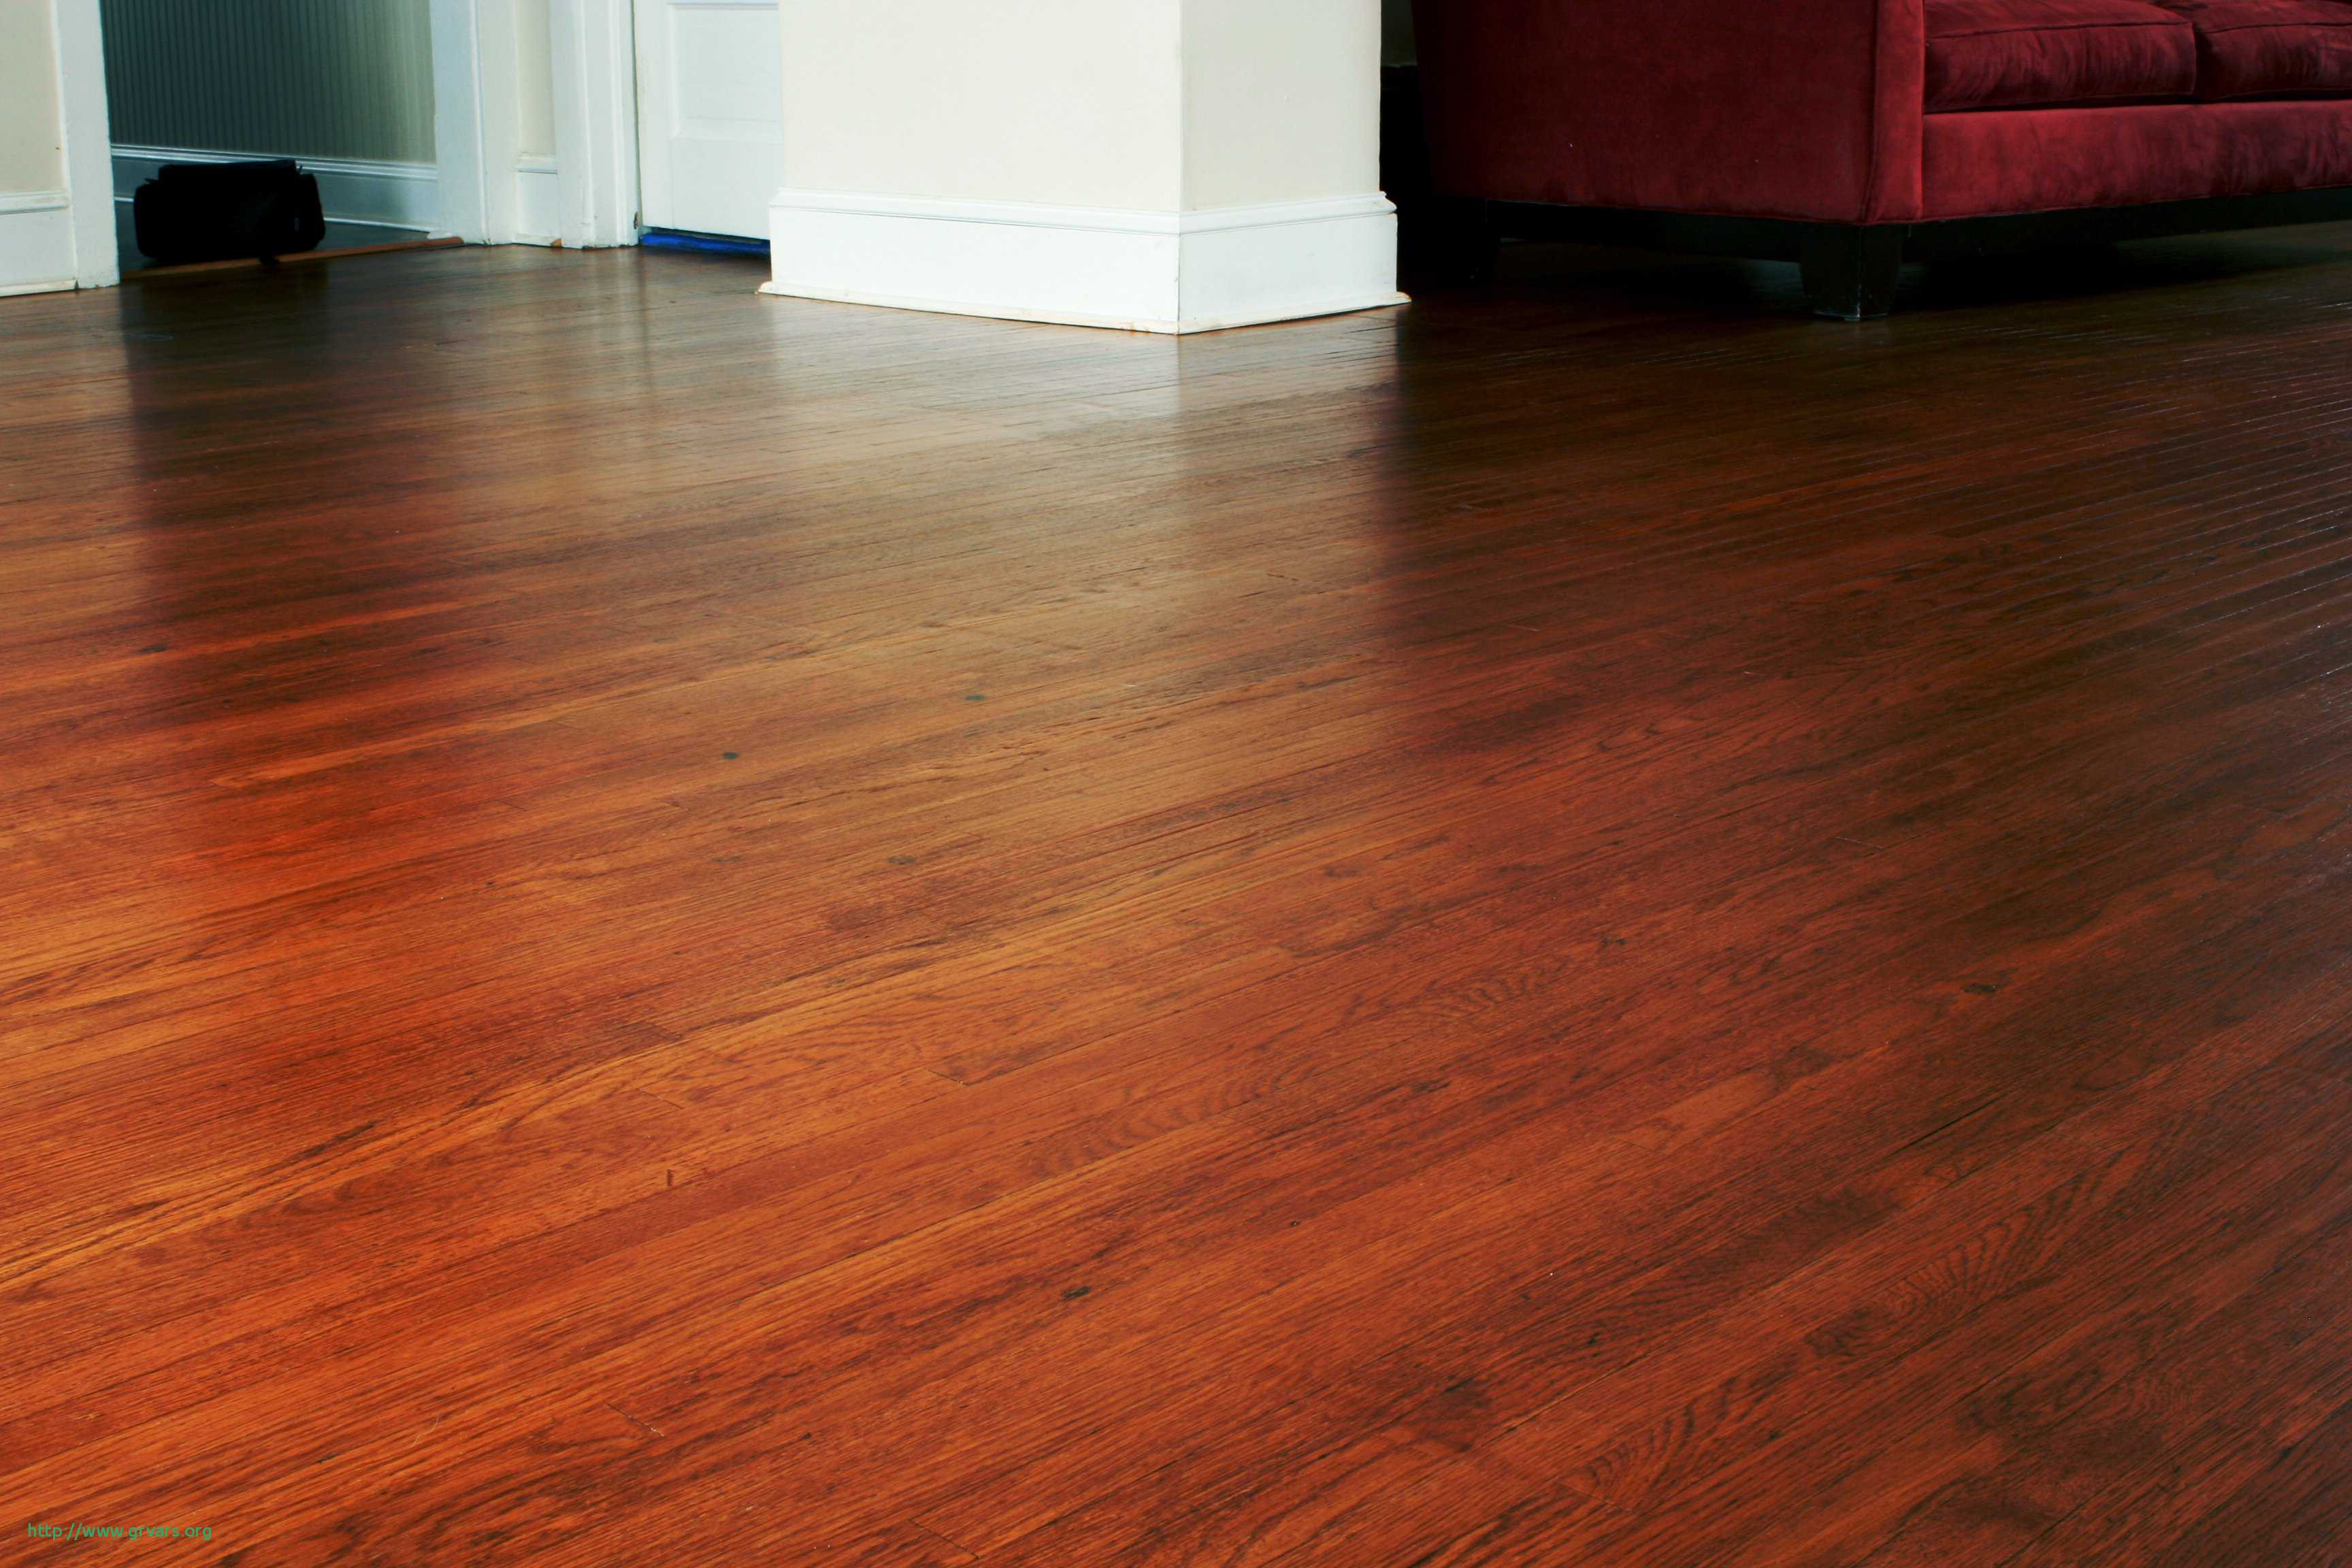 12 Popular Laminate Flooring Vs Engineered Hardwood Cost 2024 free download laminate flooring vs engineered hardwood cost of laminate versus hardwood price difference between hardwood and regarding pros and cons of laminate flooring versus hardwood unique how to dia